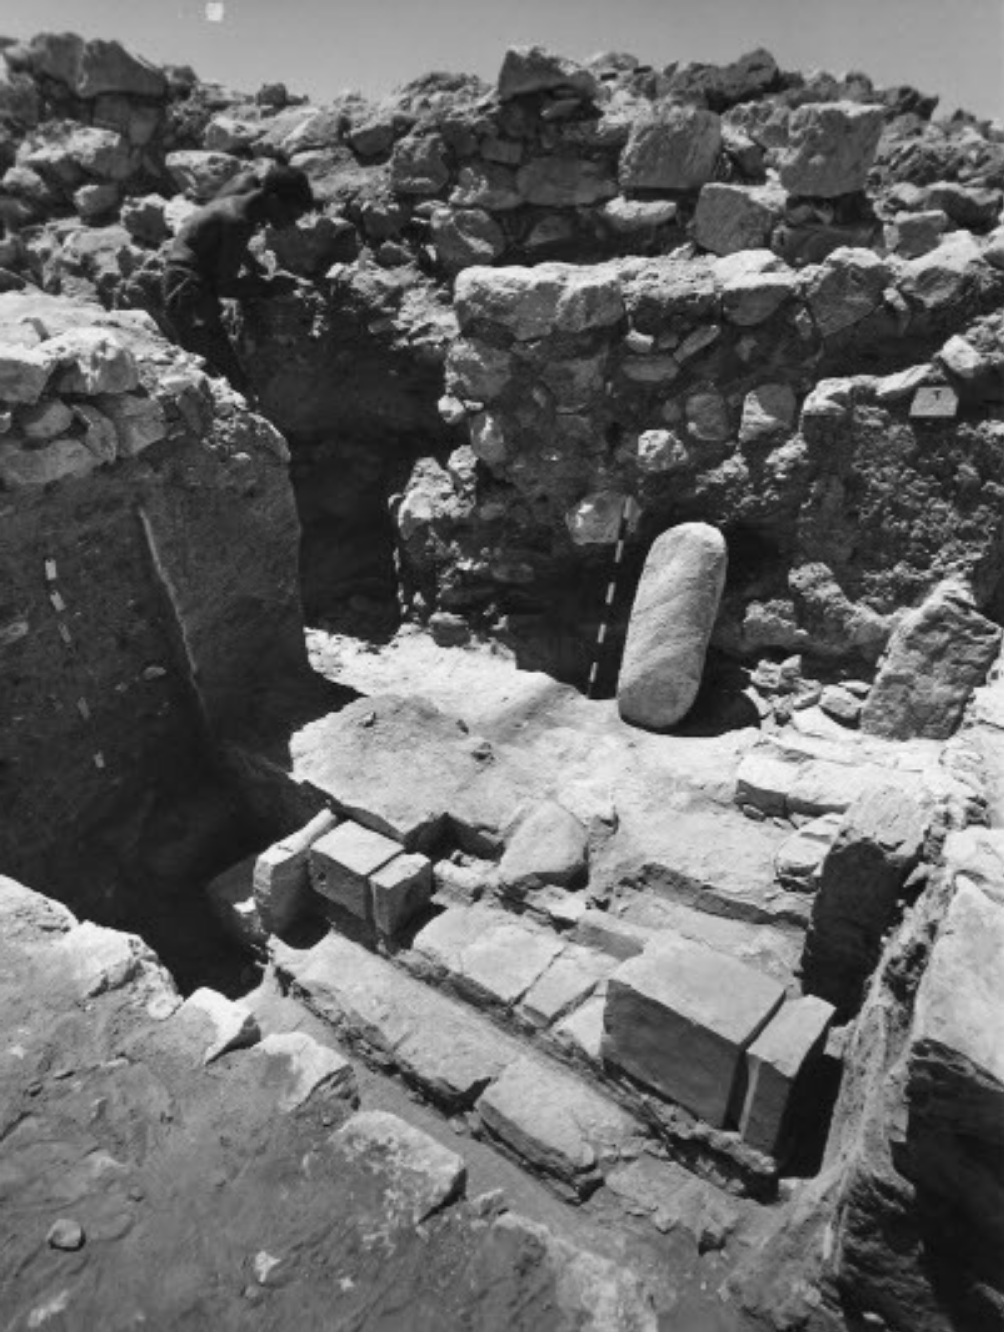 The Tel Arad site during excavations in the 1960s, showing the two toppled altars in their original position.  (Image: E. Arie et al., 2020.)